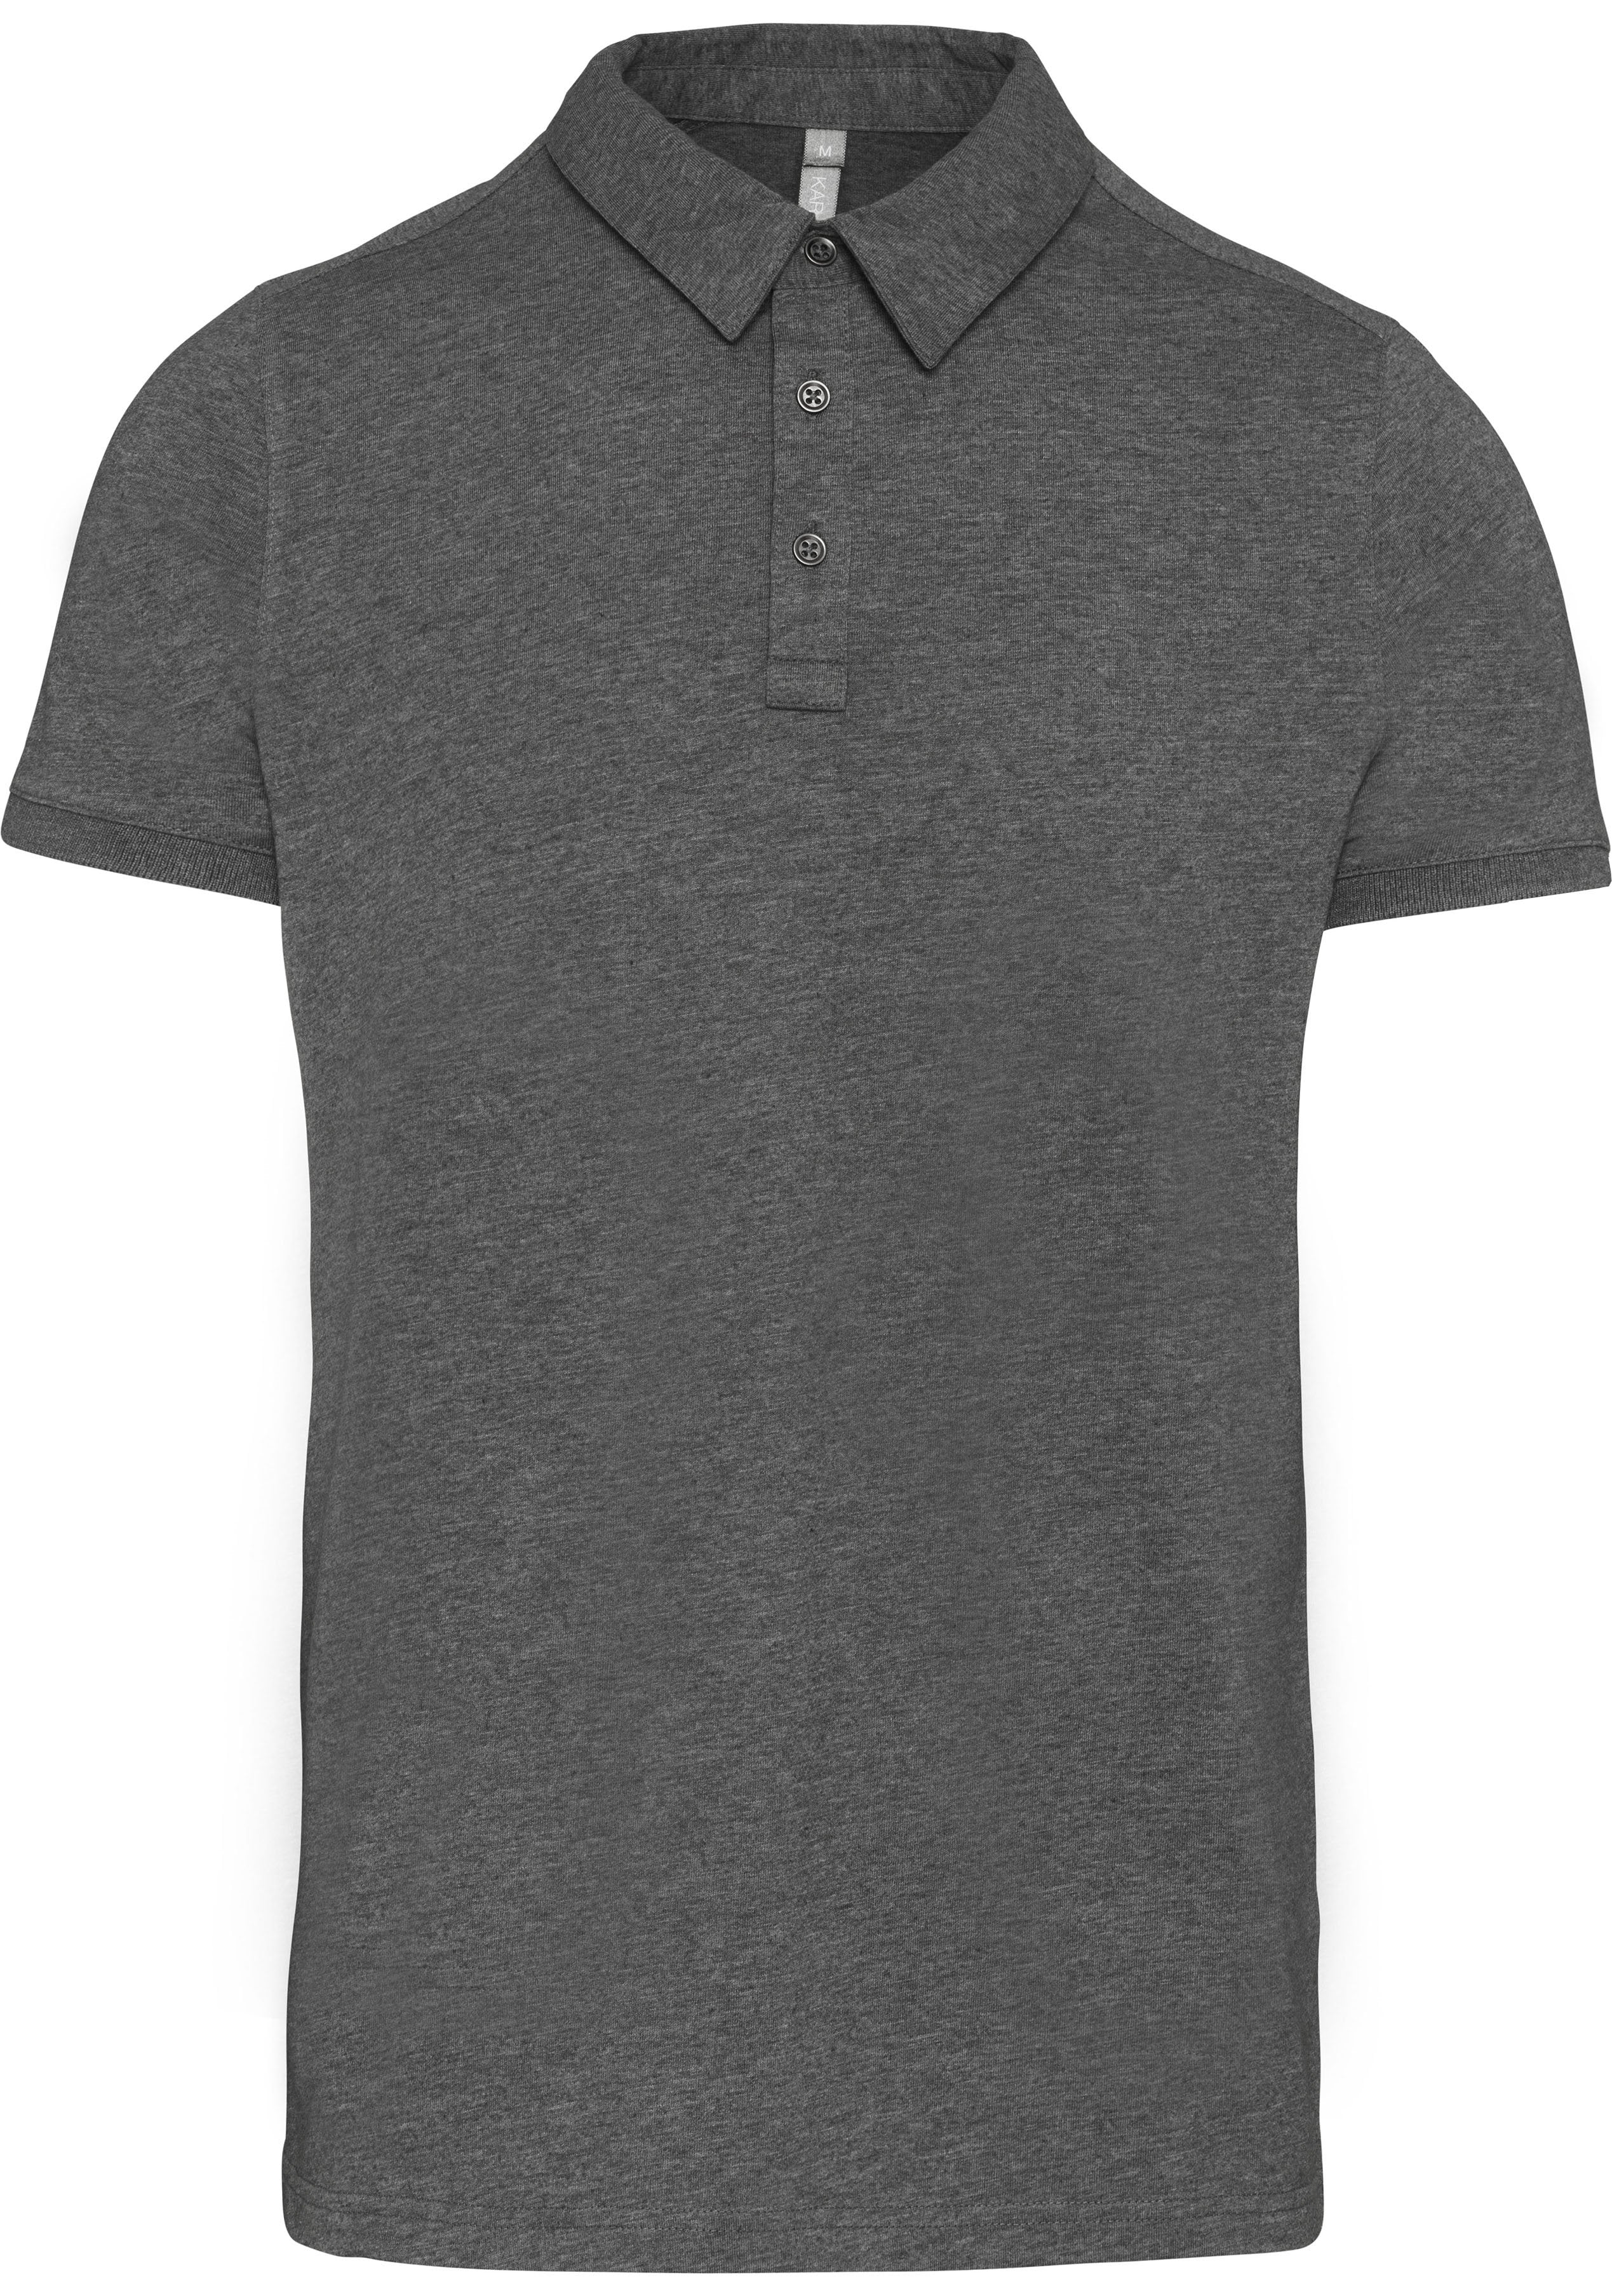 Polo personnalisé manches courtes classique golf- K262 polo homme Fruit of the Loom Heather grey S 